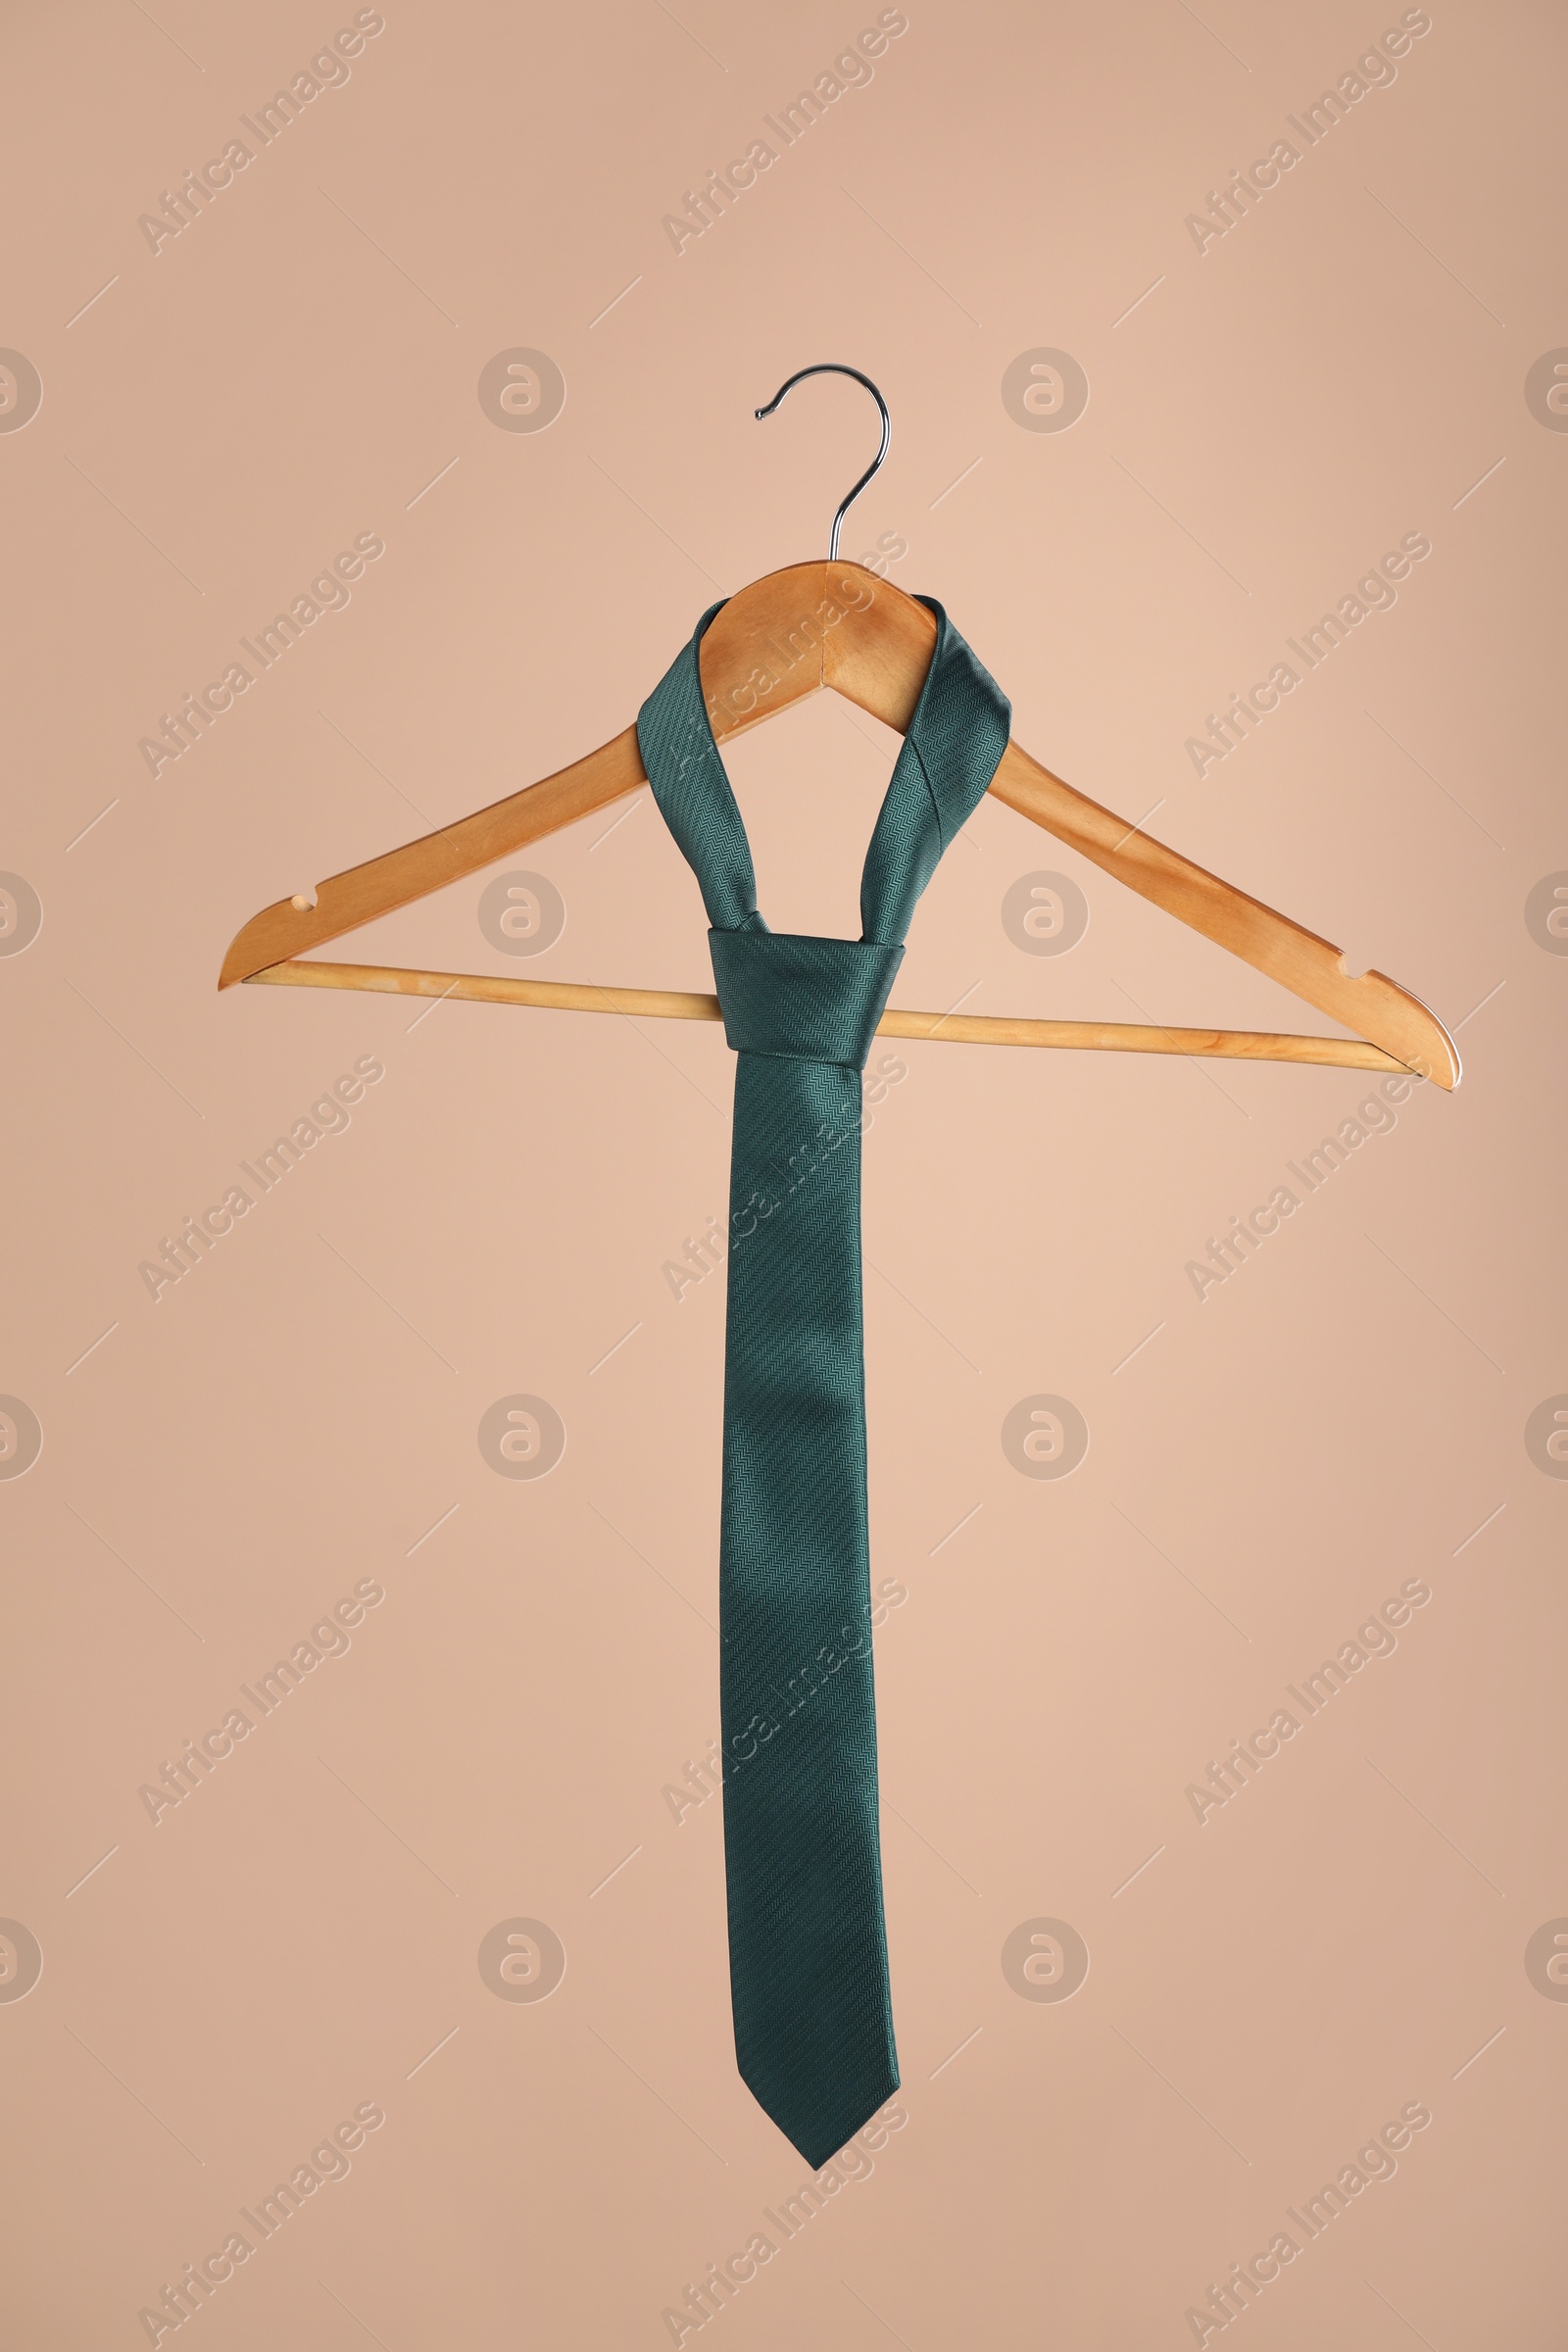 Photo of Hanger with teal tie on light brown background